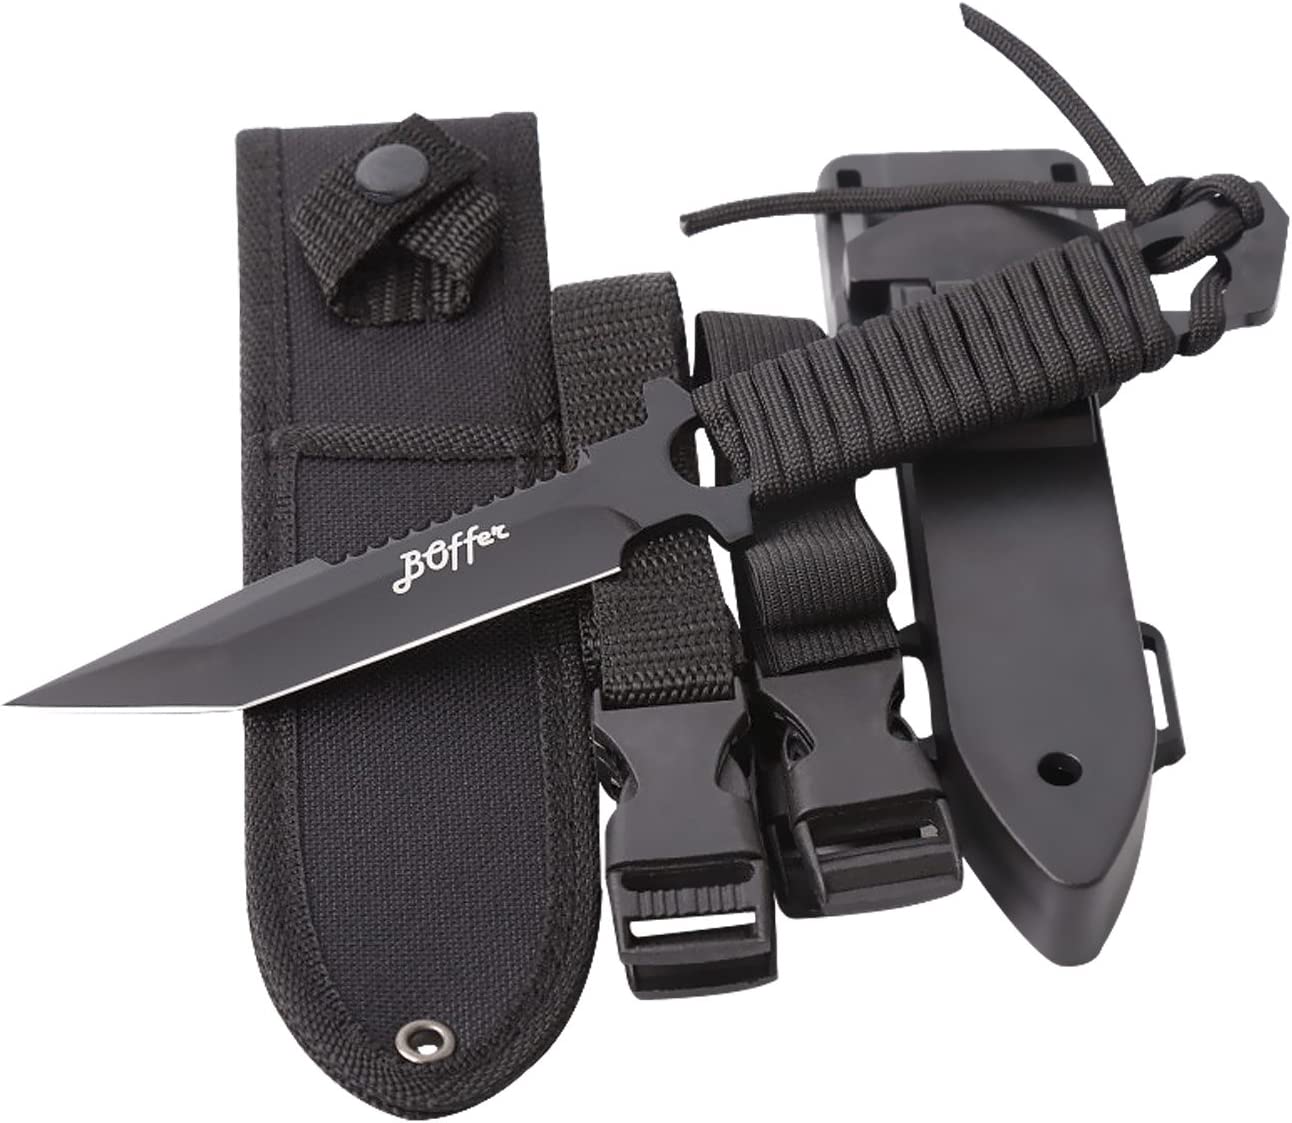 BOffer Scuba Diving Knife,Black Tactical Sharp Blade knives,Divers dive tool with 2 Types Sheaths,Sawing Edge and 2 Pairs Leg Straps,Best for Snorkeling,Hunting,Survival Rescue and Water Sports.